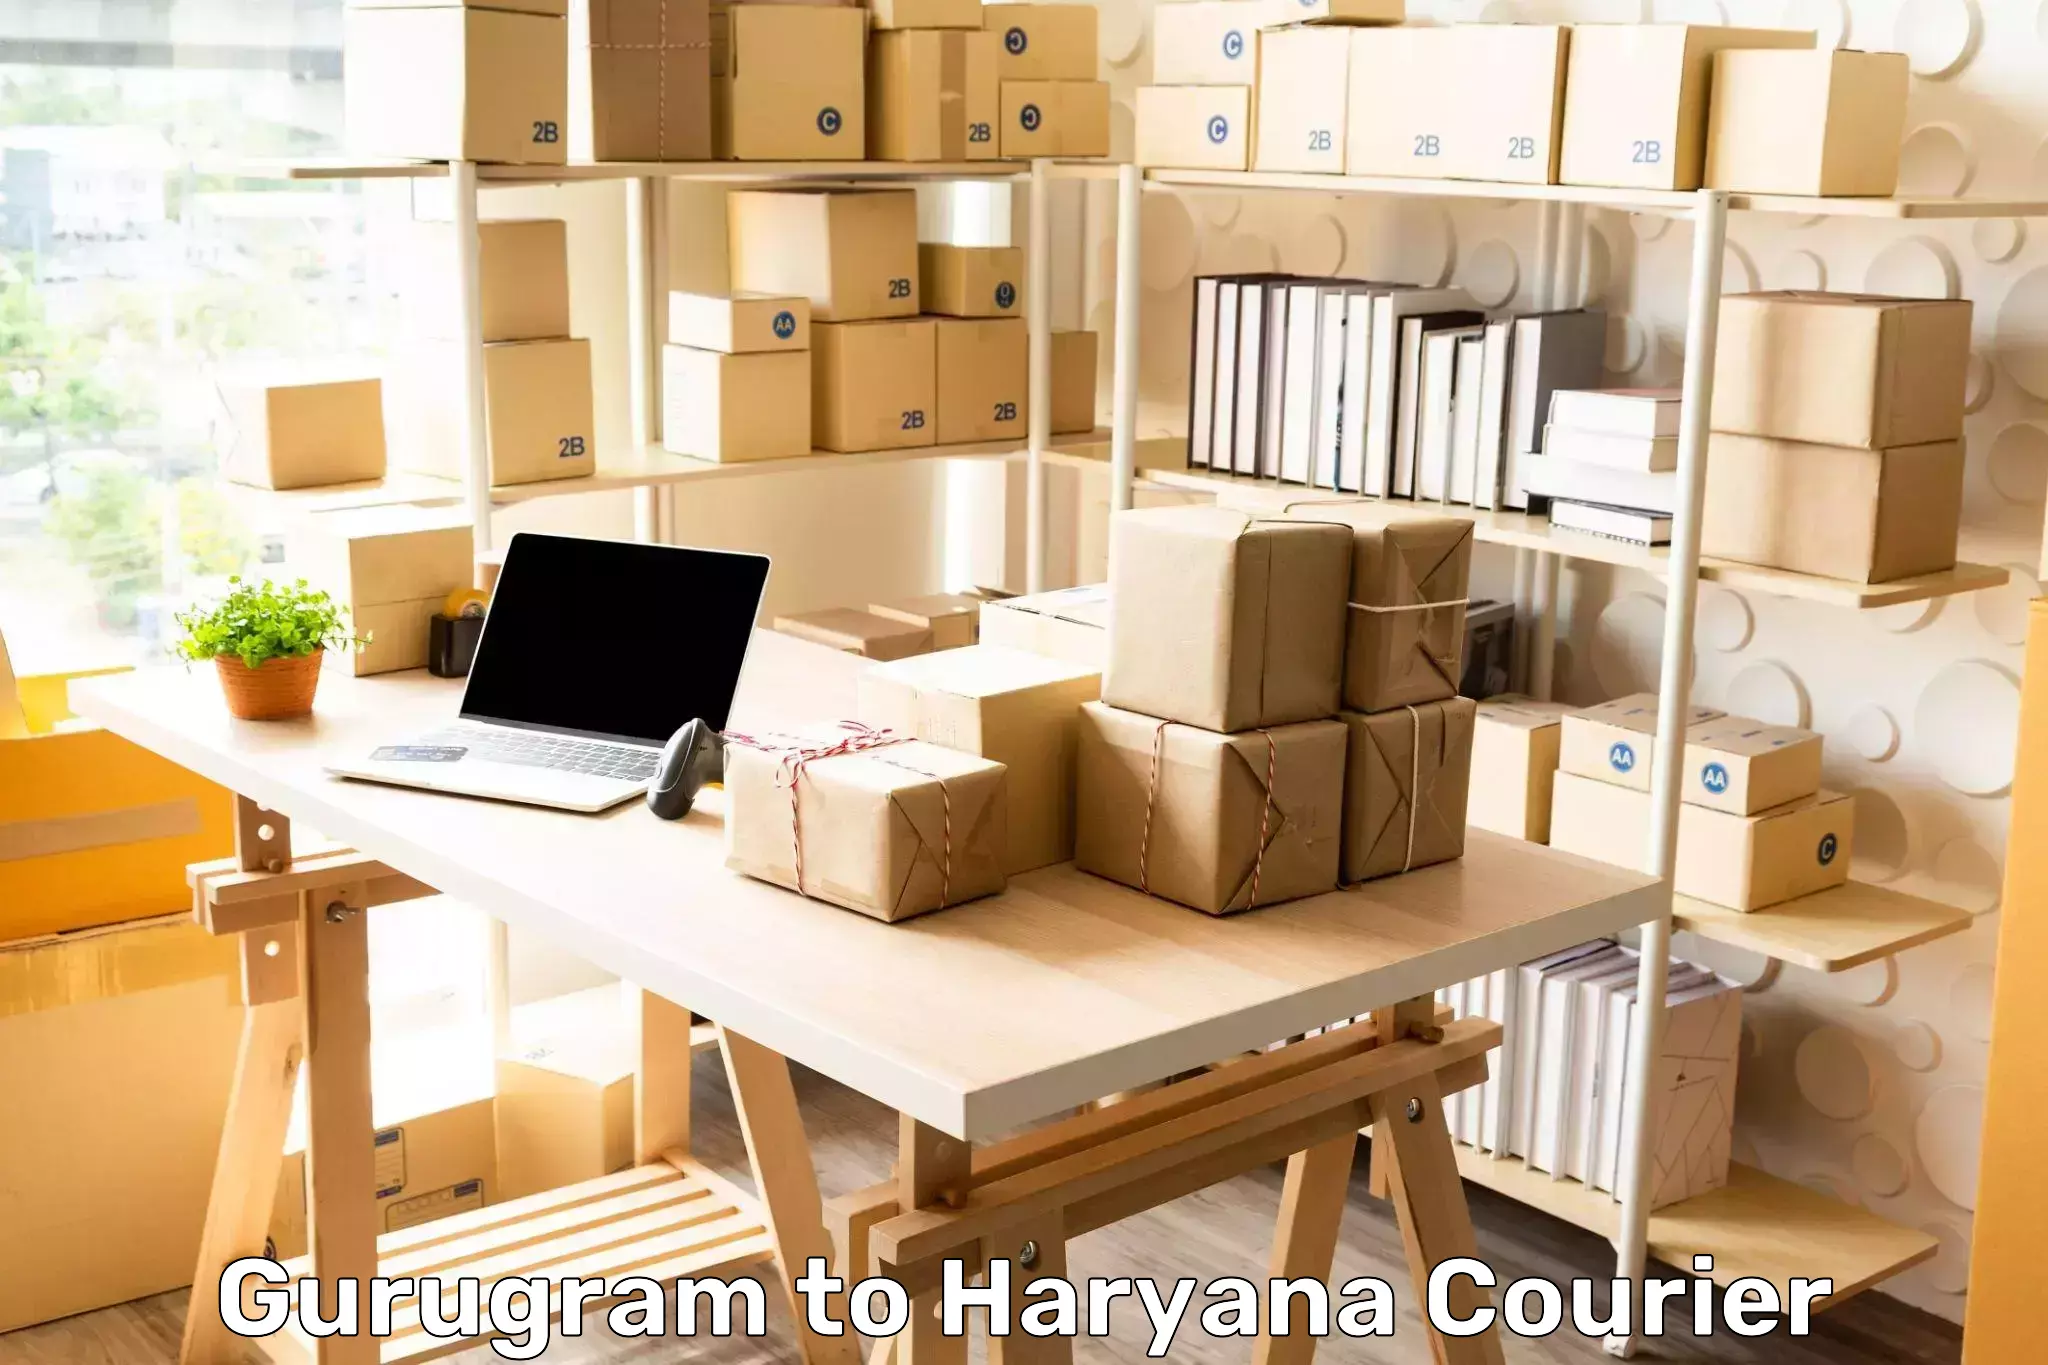 Next-day delivery options Gurugram to Chaudhary Charan Singh Haryana Agricultural University Hisar